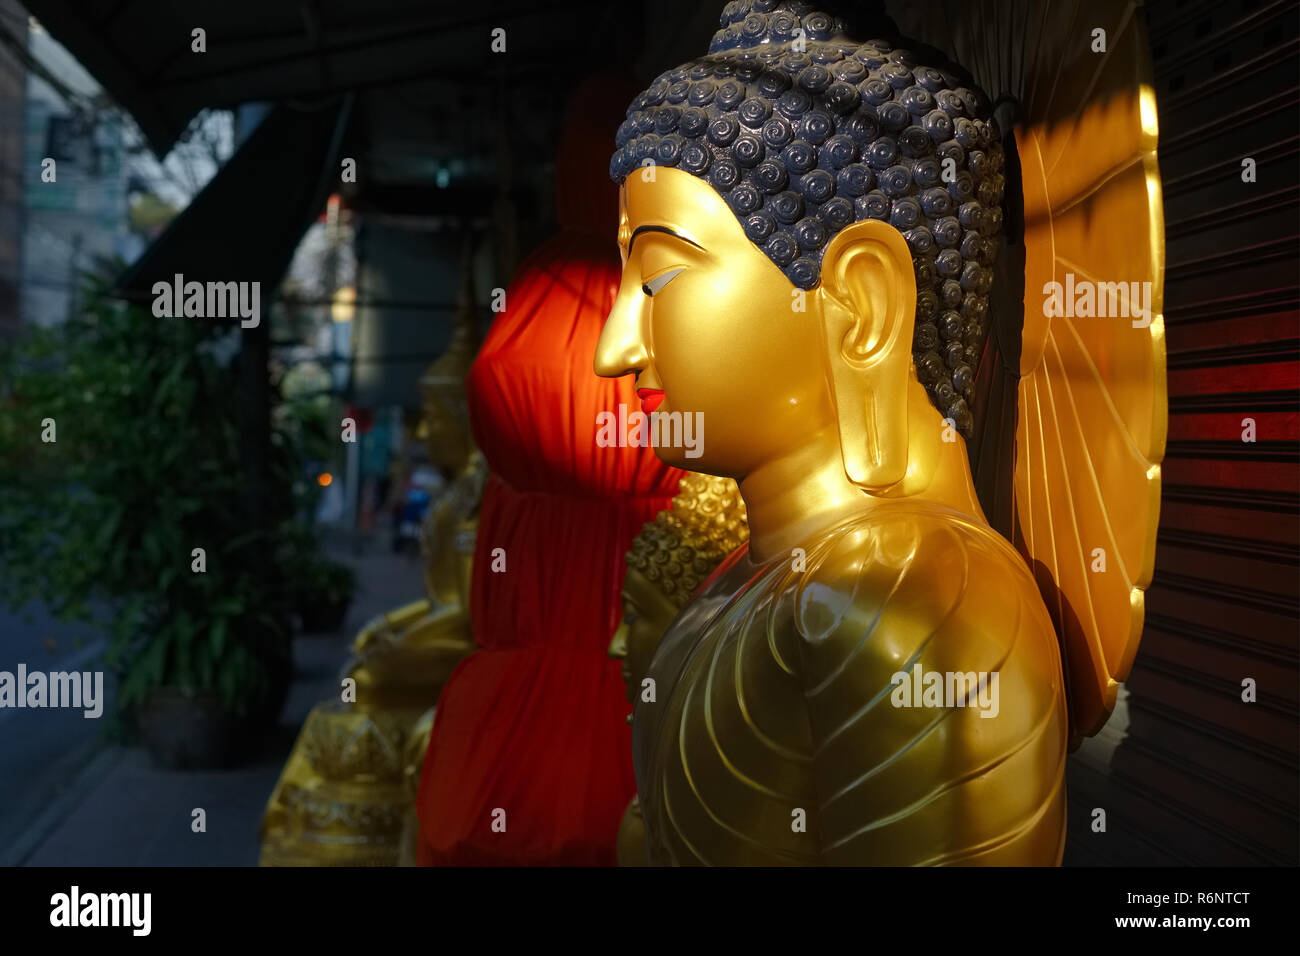 A Buddha statue outside a factory for Buddha statues in Bamrung Muang Road, Bangkok, Thailand, is illuminated by the first rays of the rising sun Stock Photo